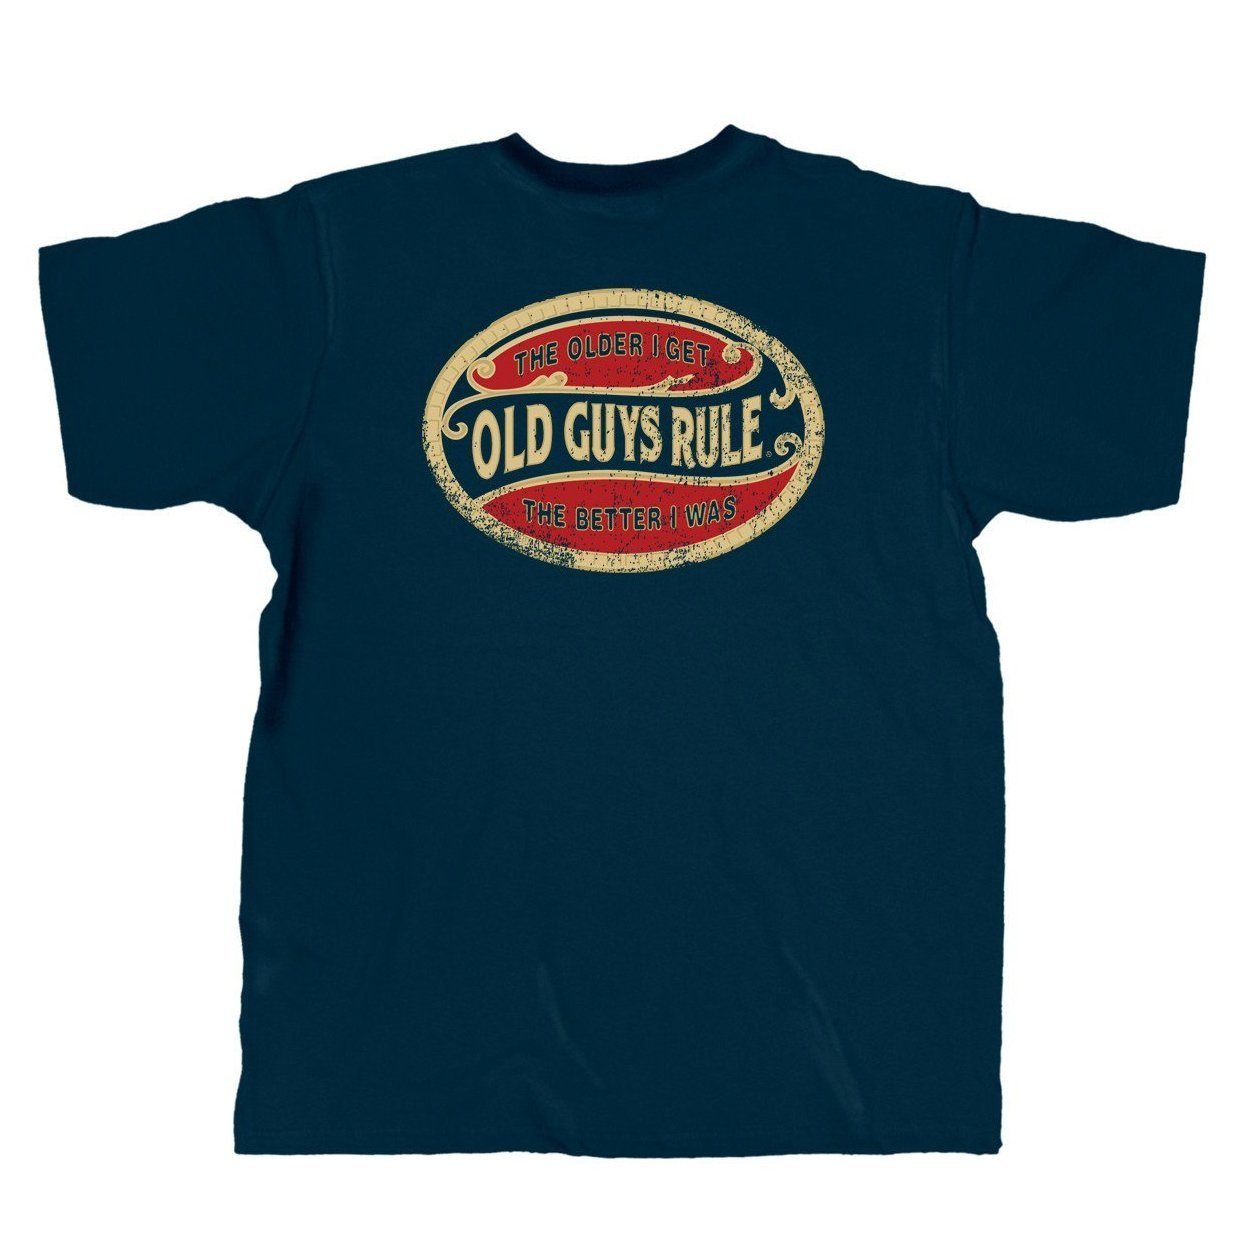 Old Guys Rule - The Older I Get... The Better I Was - Navy T-Shirt - Main View